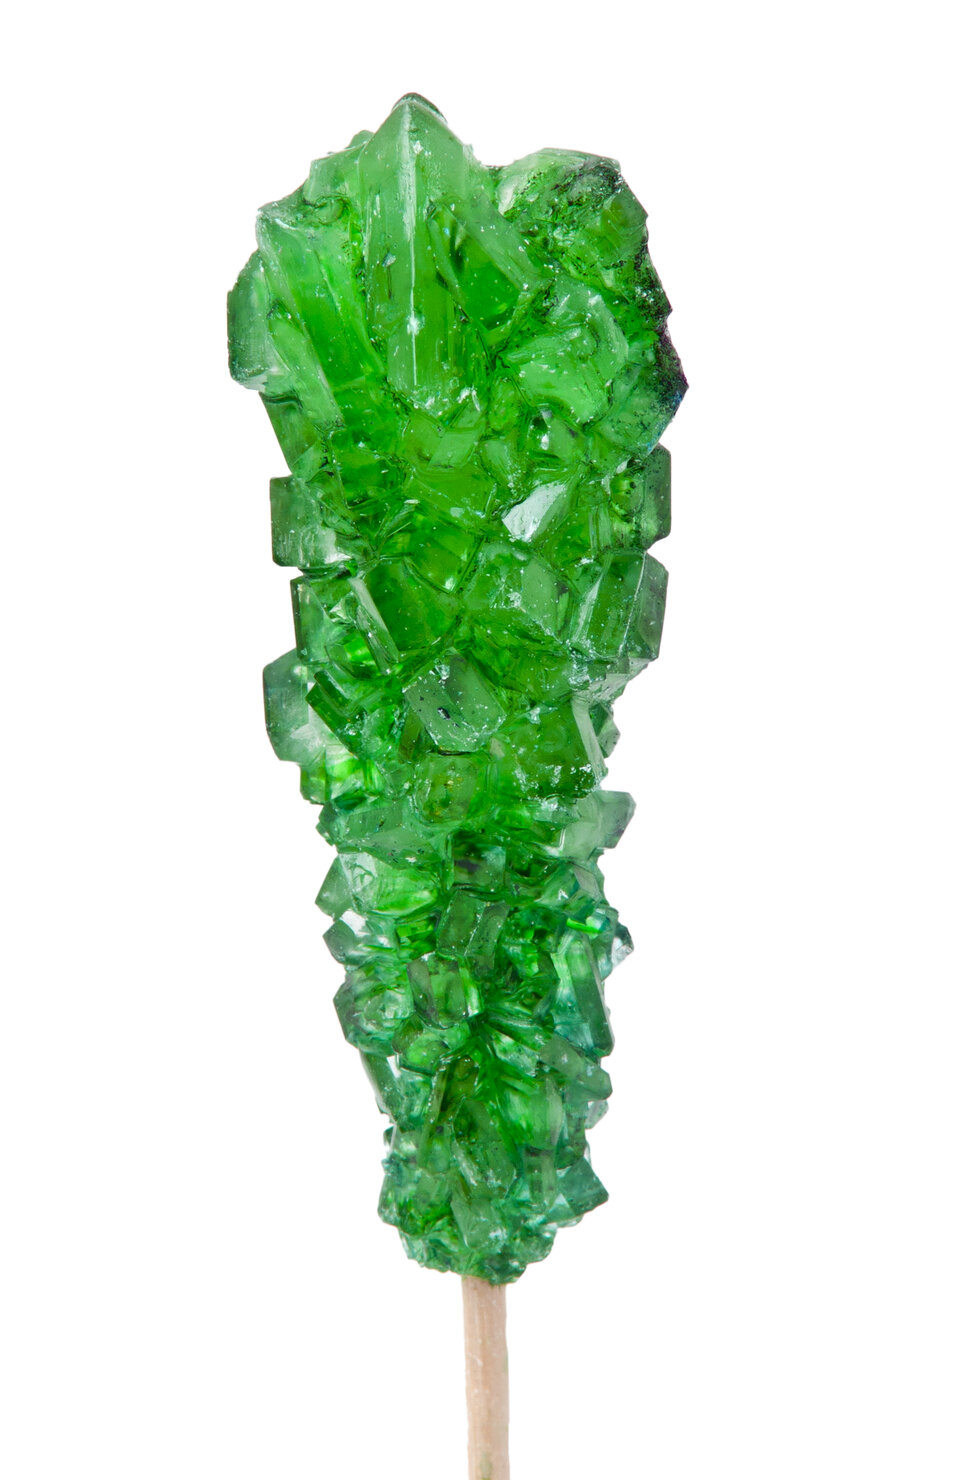 Rock candy - a form of crystalisation